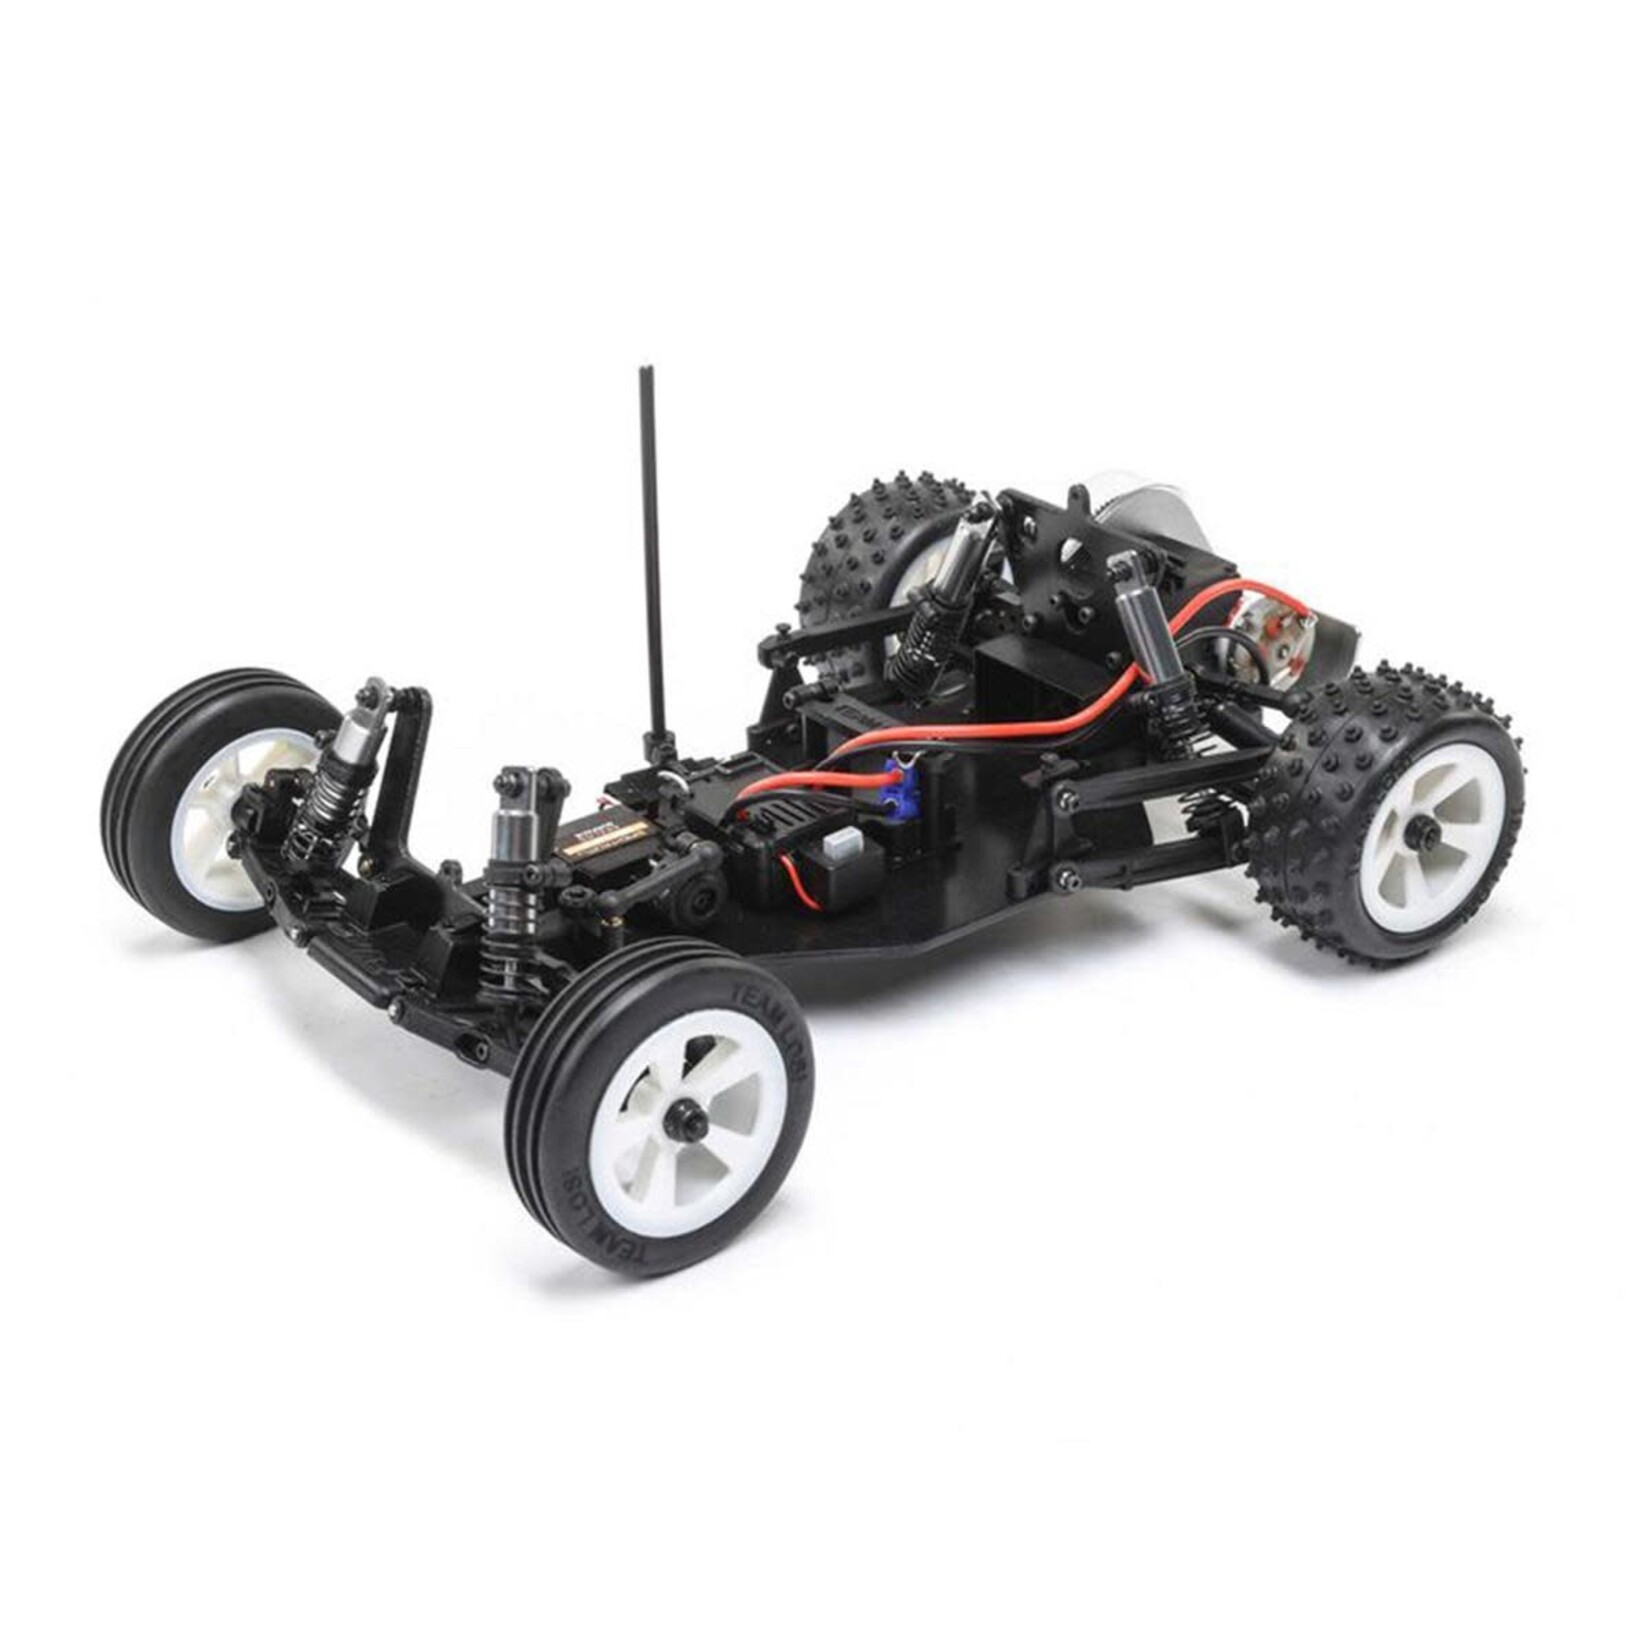 Losi Losi JRX2 1/16 RTR 2WD Buggy (Blue) w/2.4GHz Radio, Battery & Charger #LOS01020T2